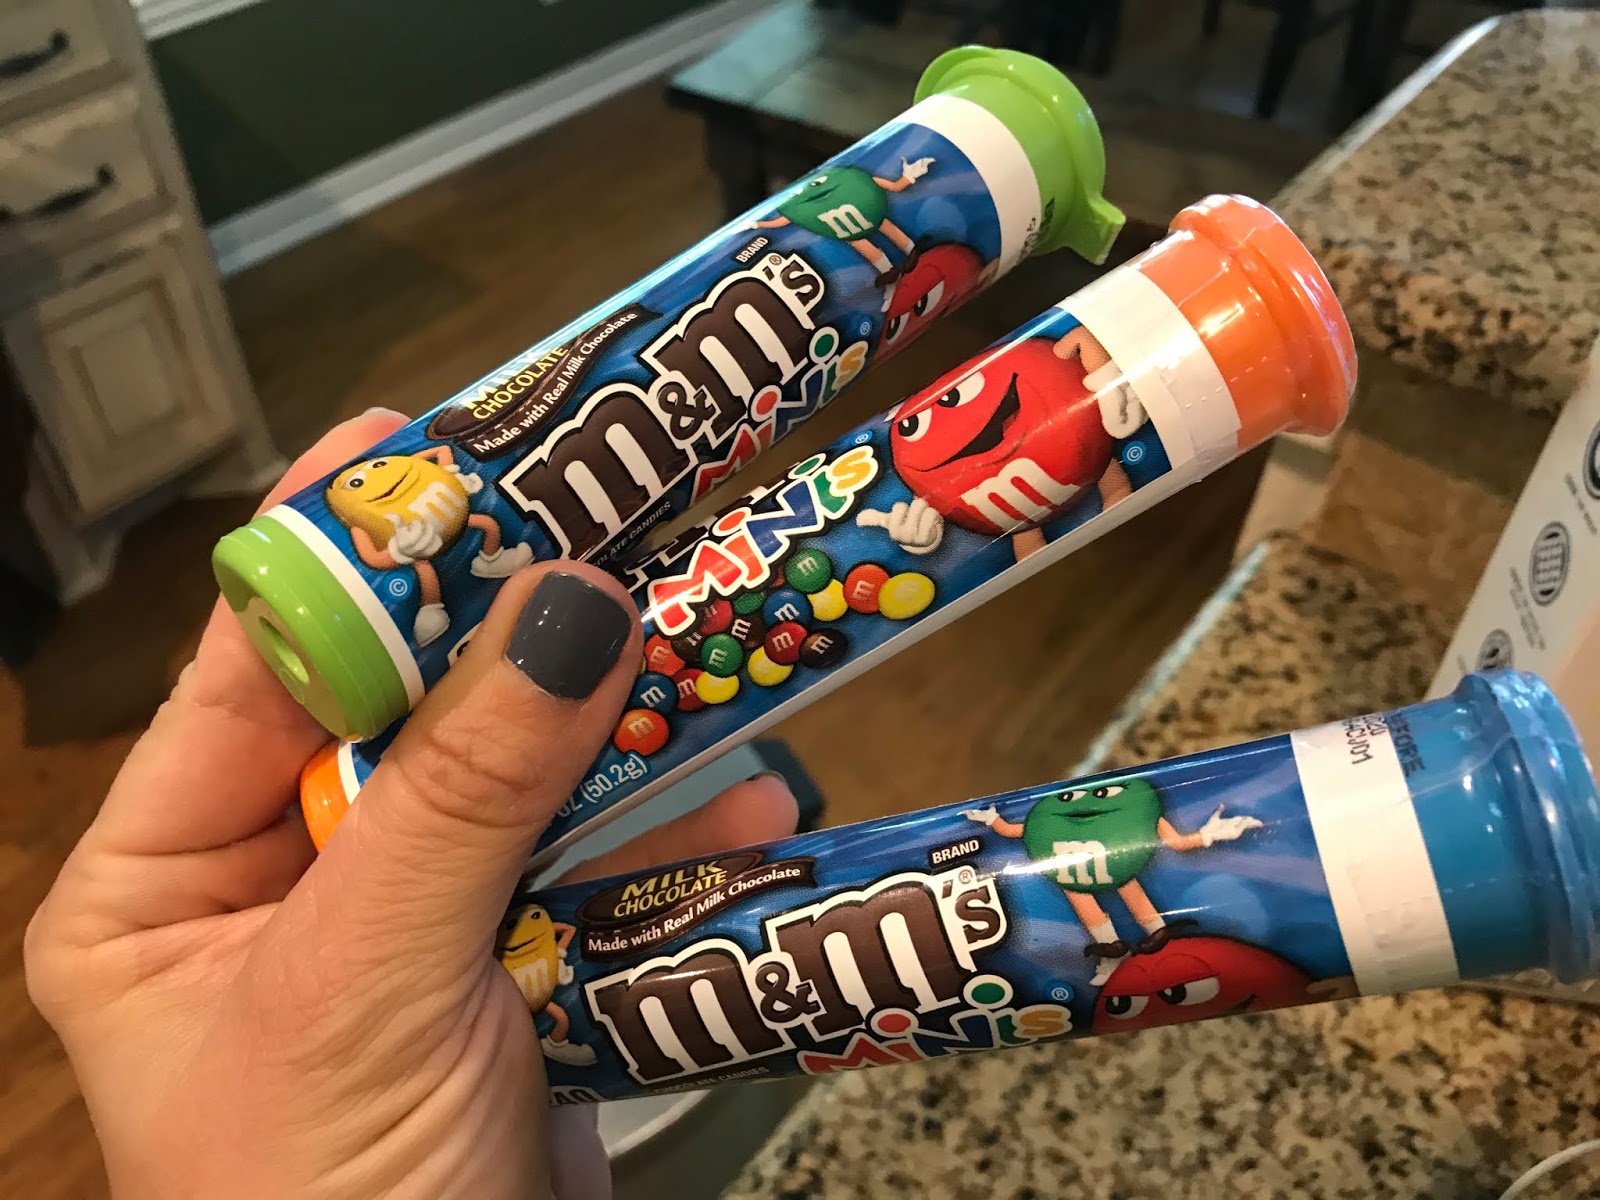 My Mad World: Crafty Tuesday- Mini M&M container ideas